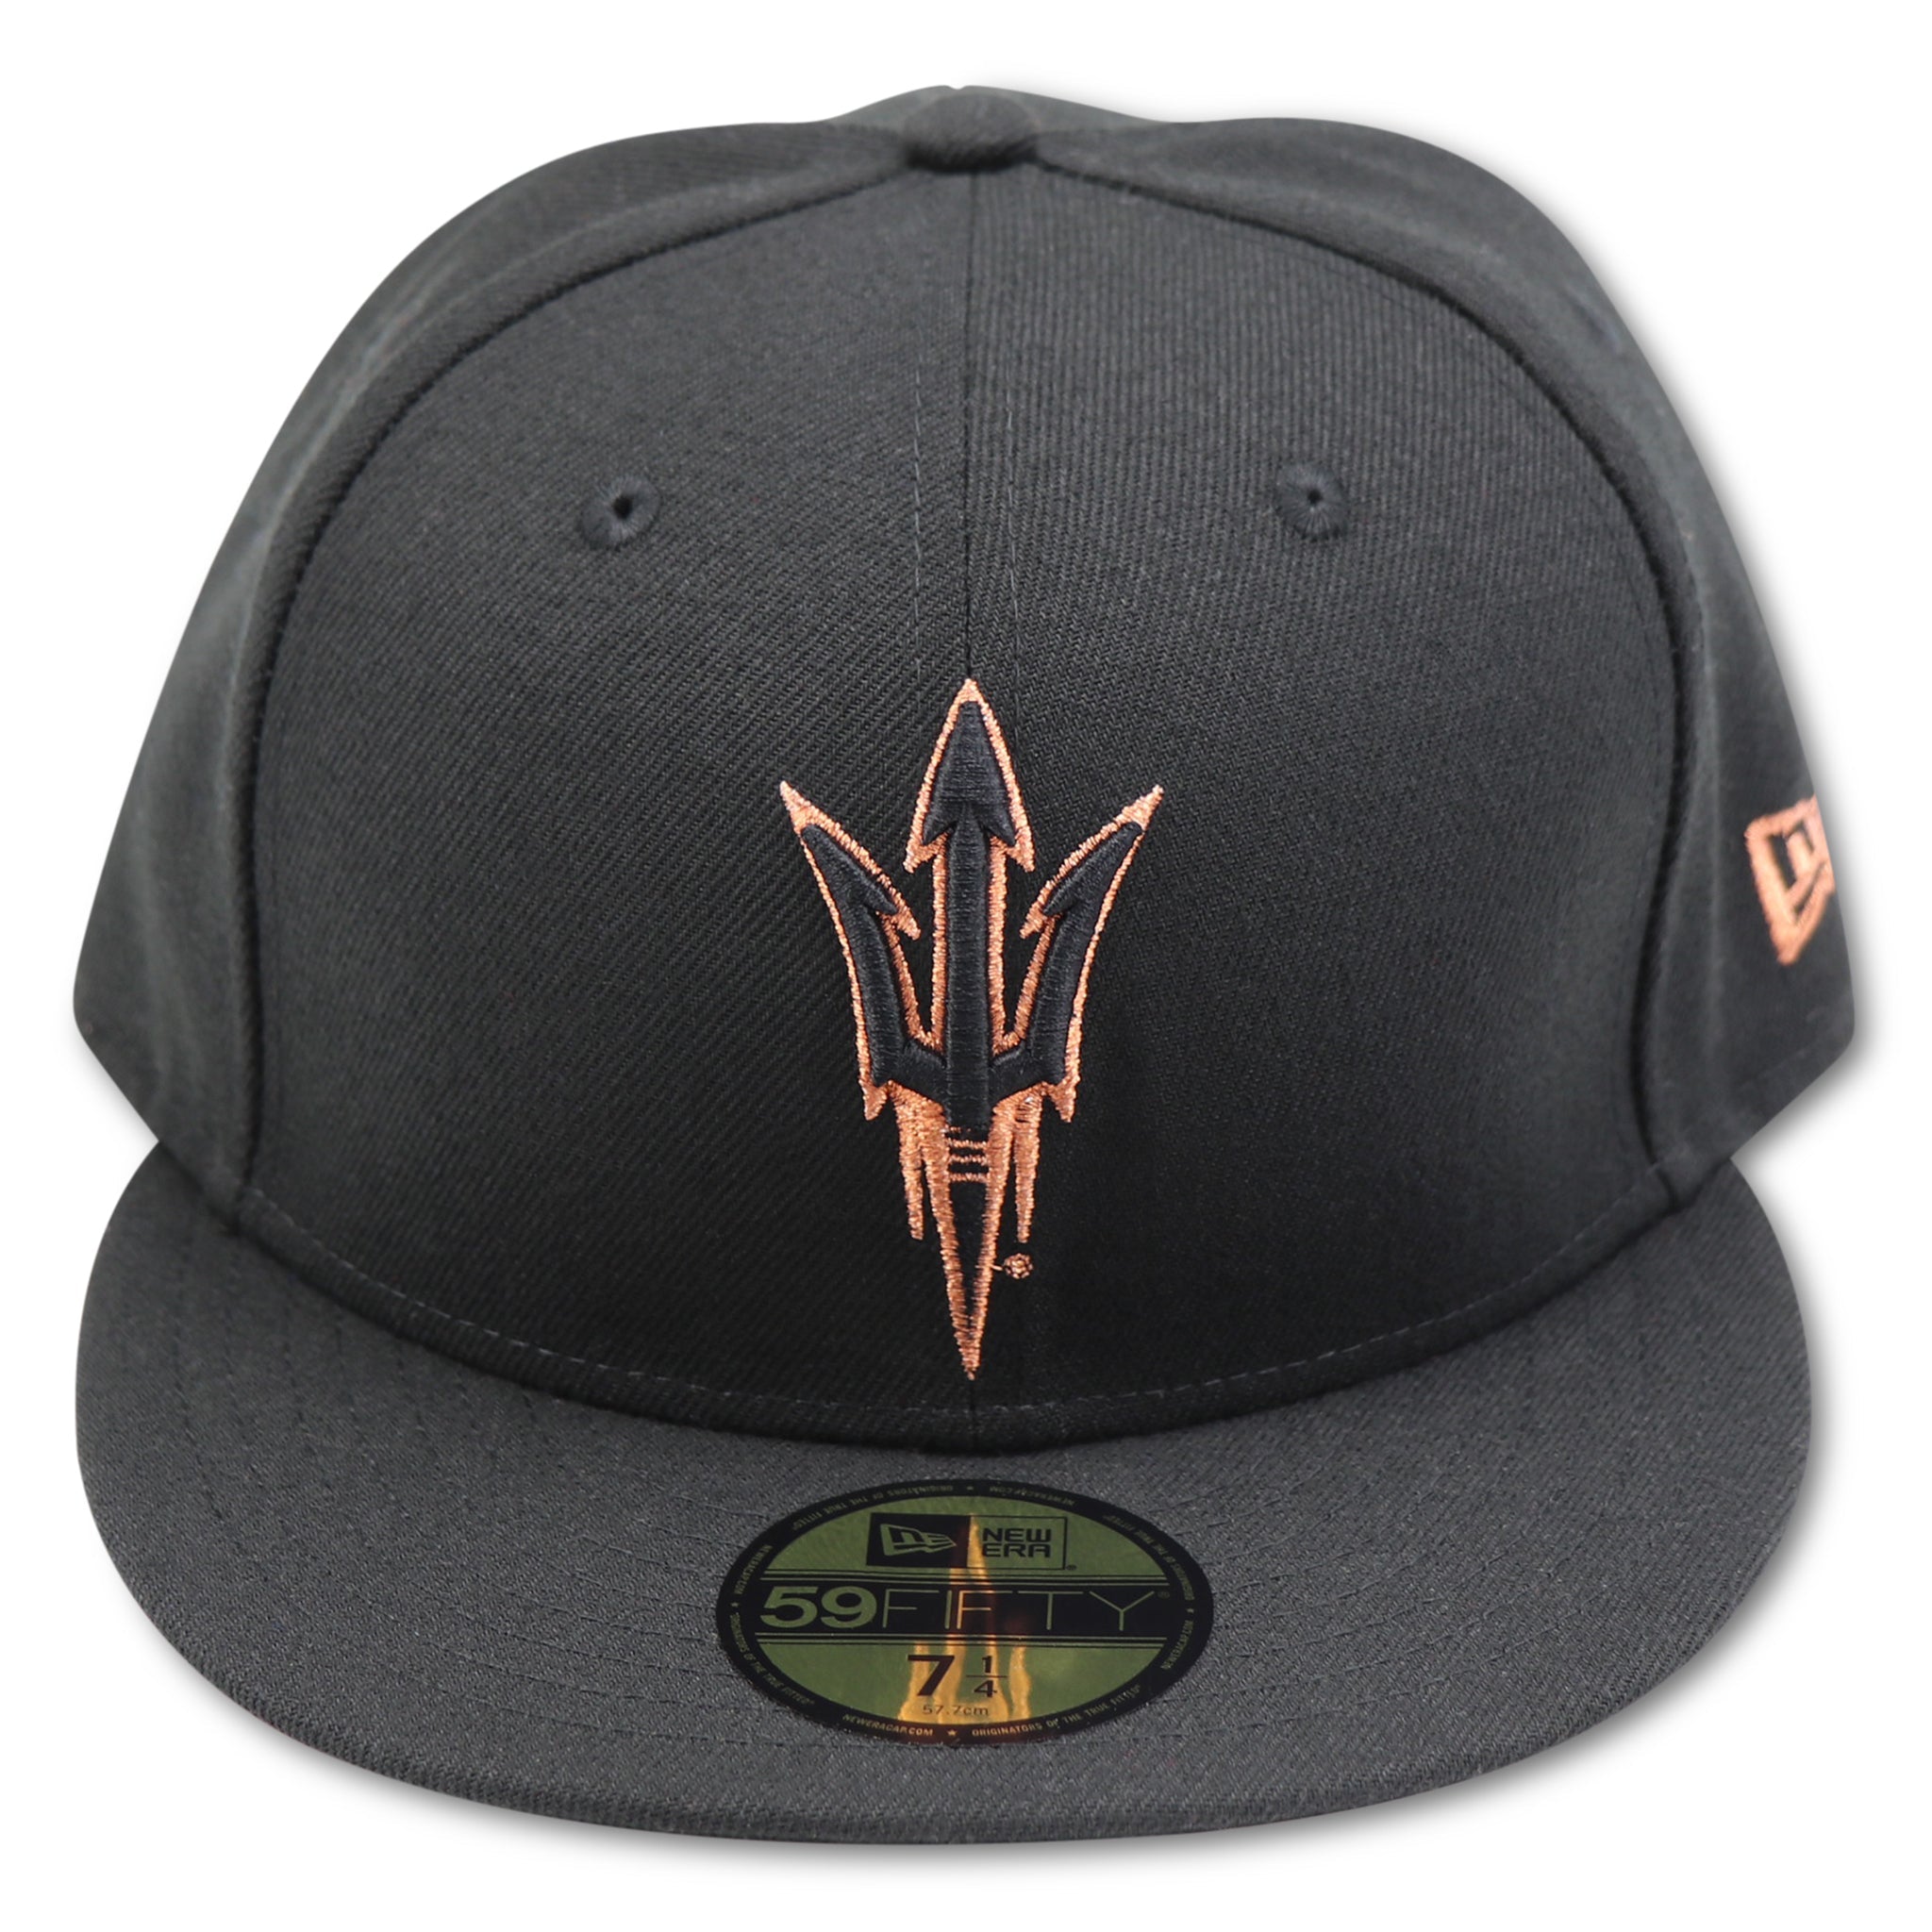 ARIZONA STATE SUNDEVILS NEW ERA 59FIFTY FITTED